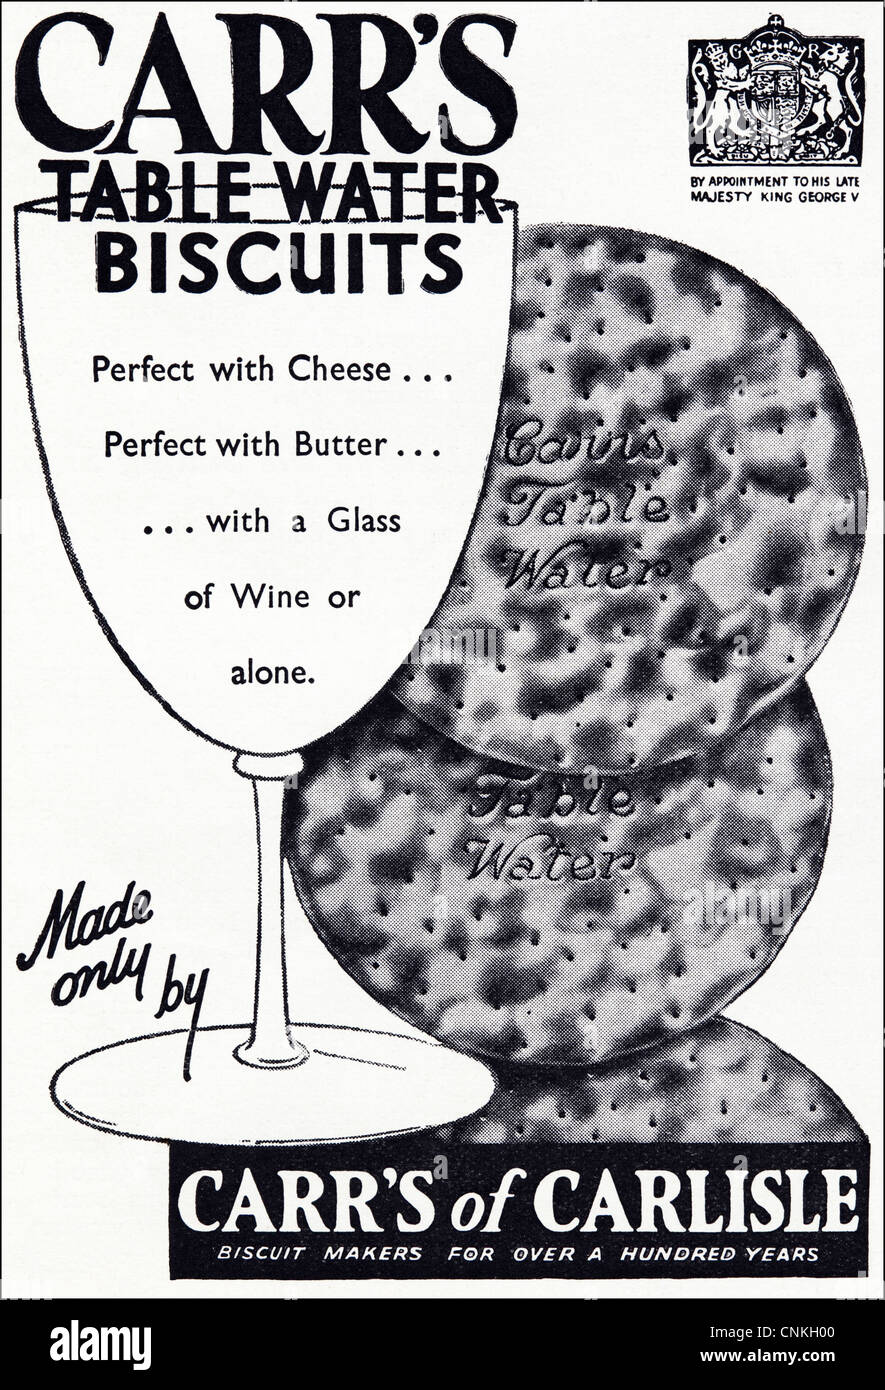 Original 1930s vintage advert in consumer magazine, advertisement advertising CARR'S TABLE WATER BISCUITS by Royal Appointment Stock Photo